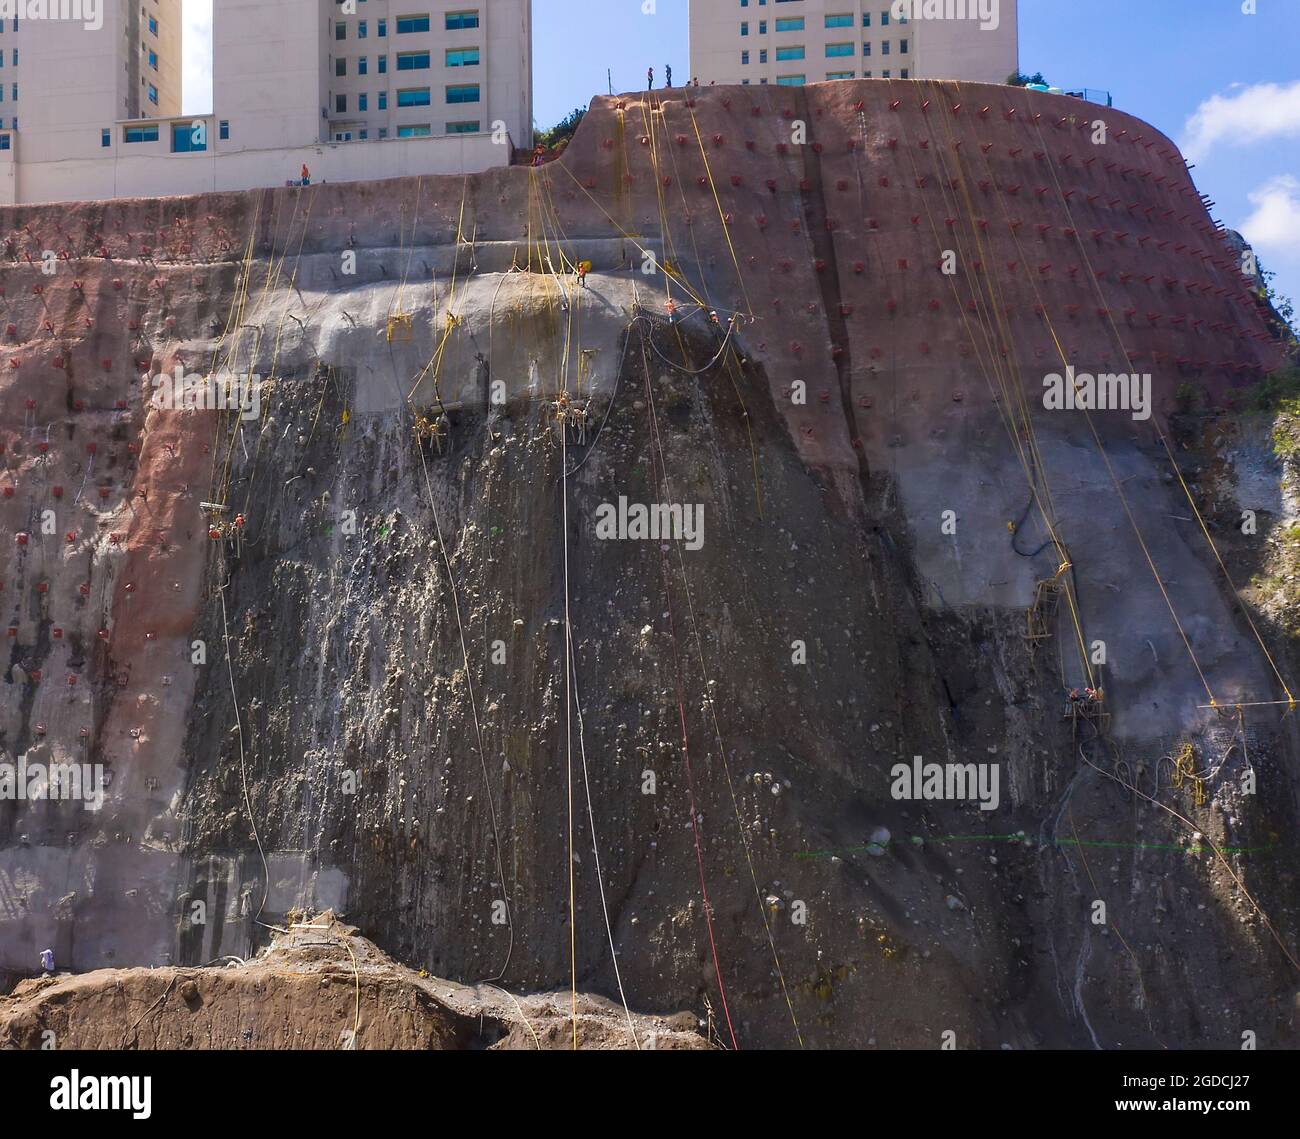 Workers reinforce a cliff face in the Santa Fe area of Mexico City, Mexico Stock Photo